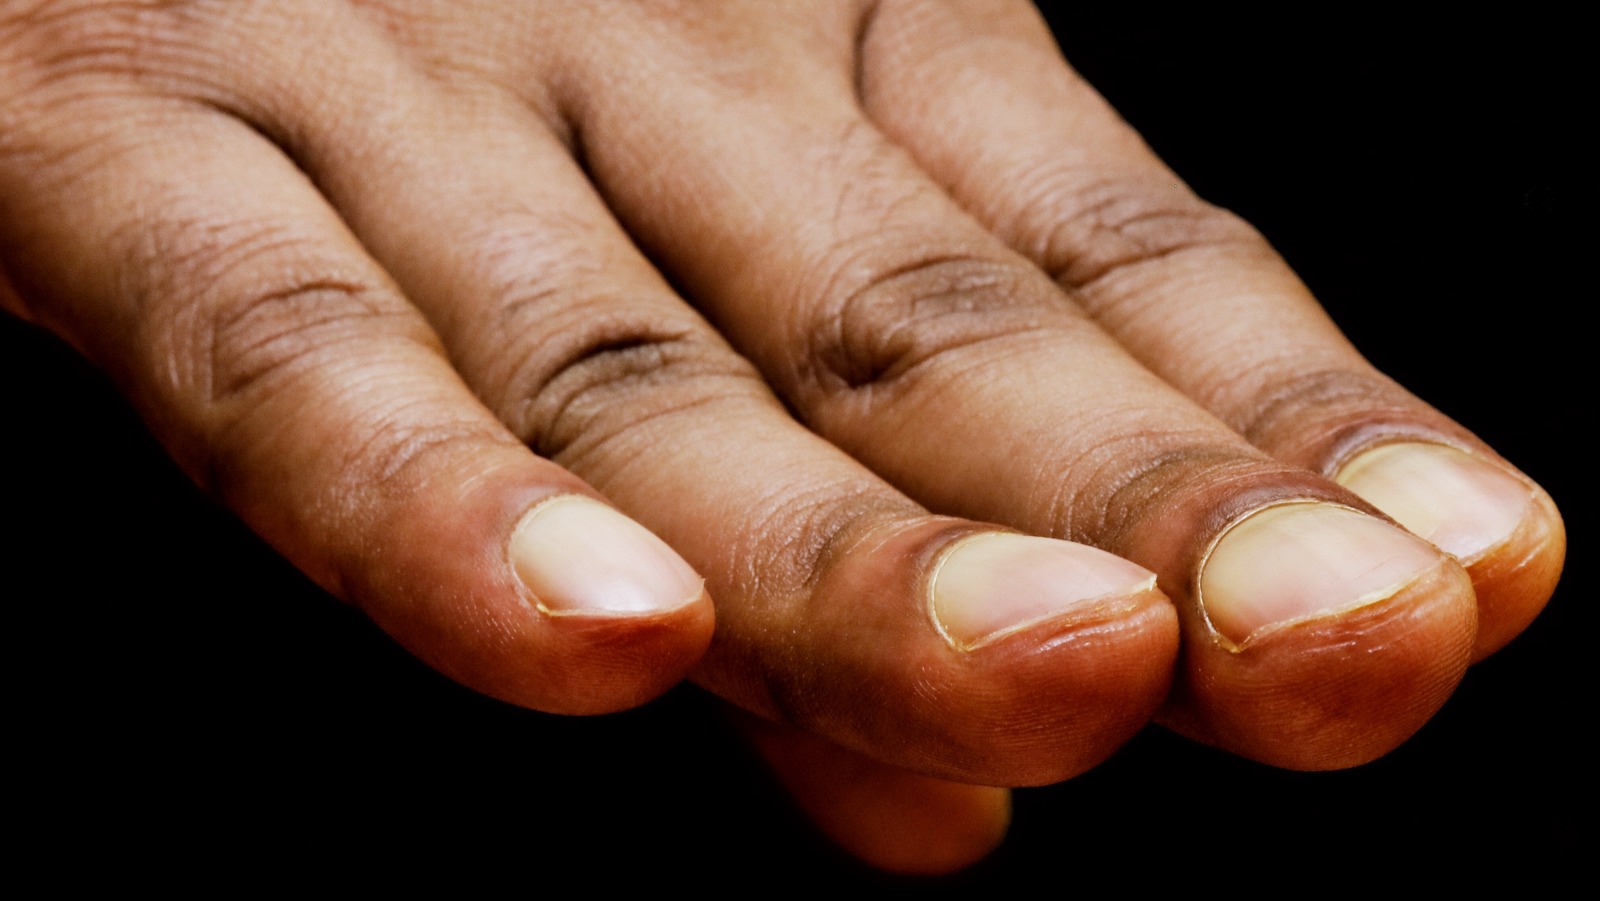 Unhealthy Nails Can Mean an Unhealthy Body - Valley View Dermatology